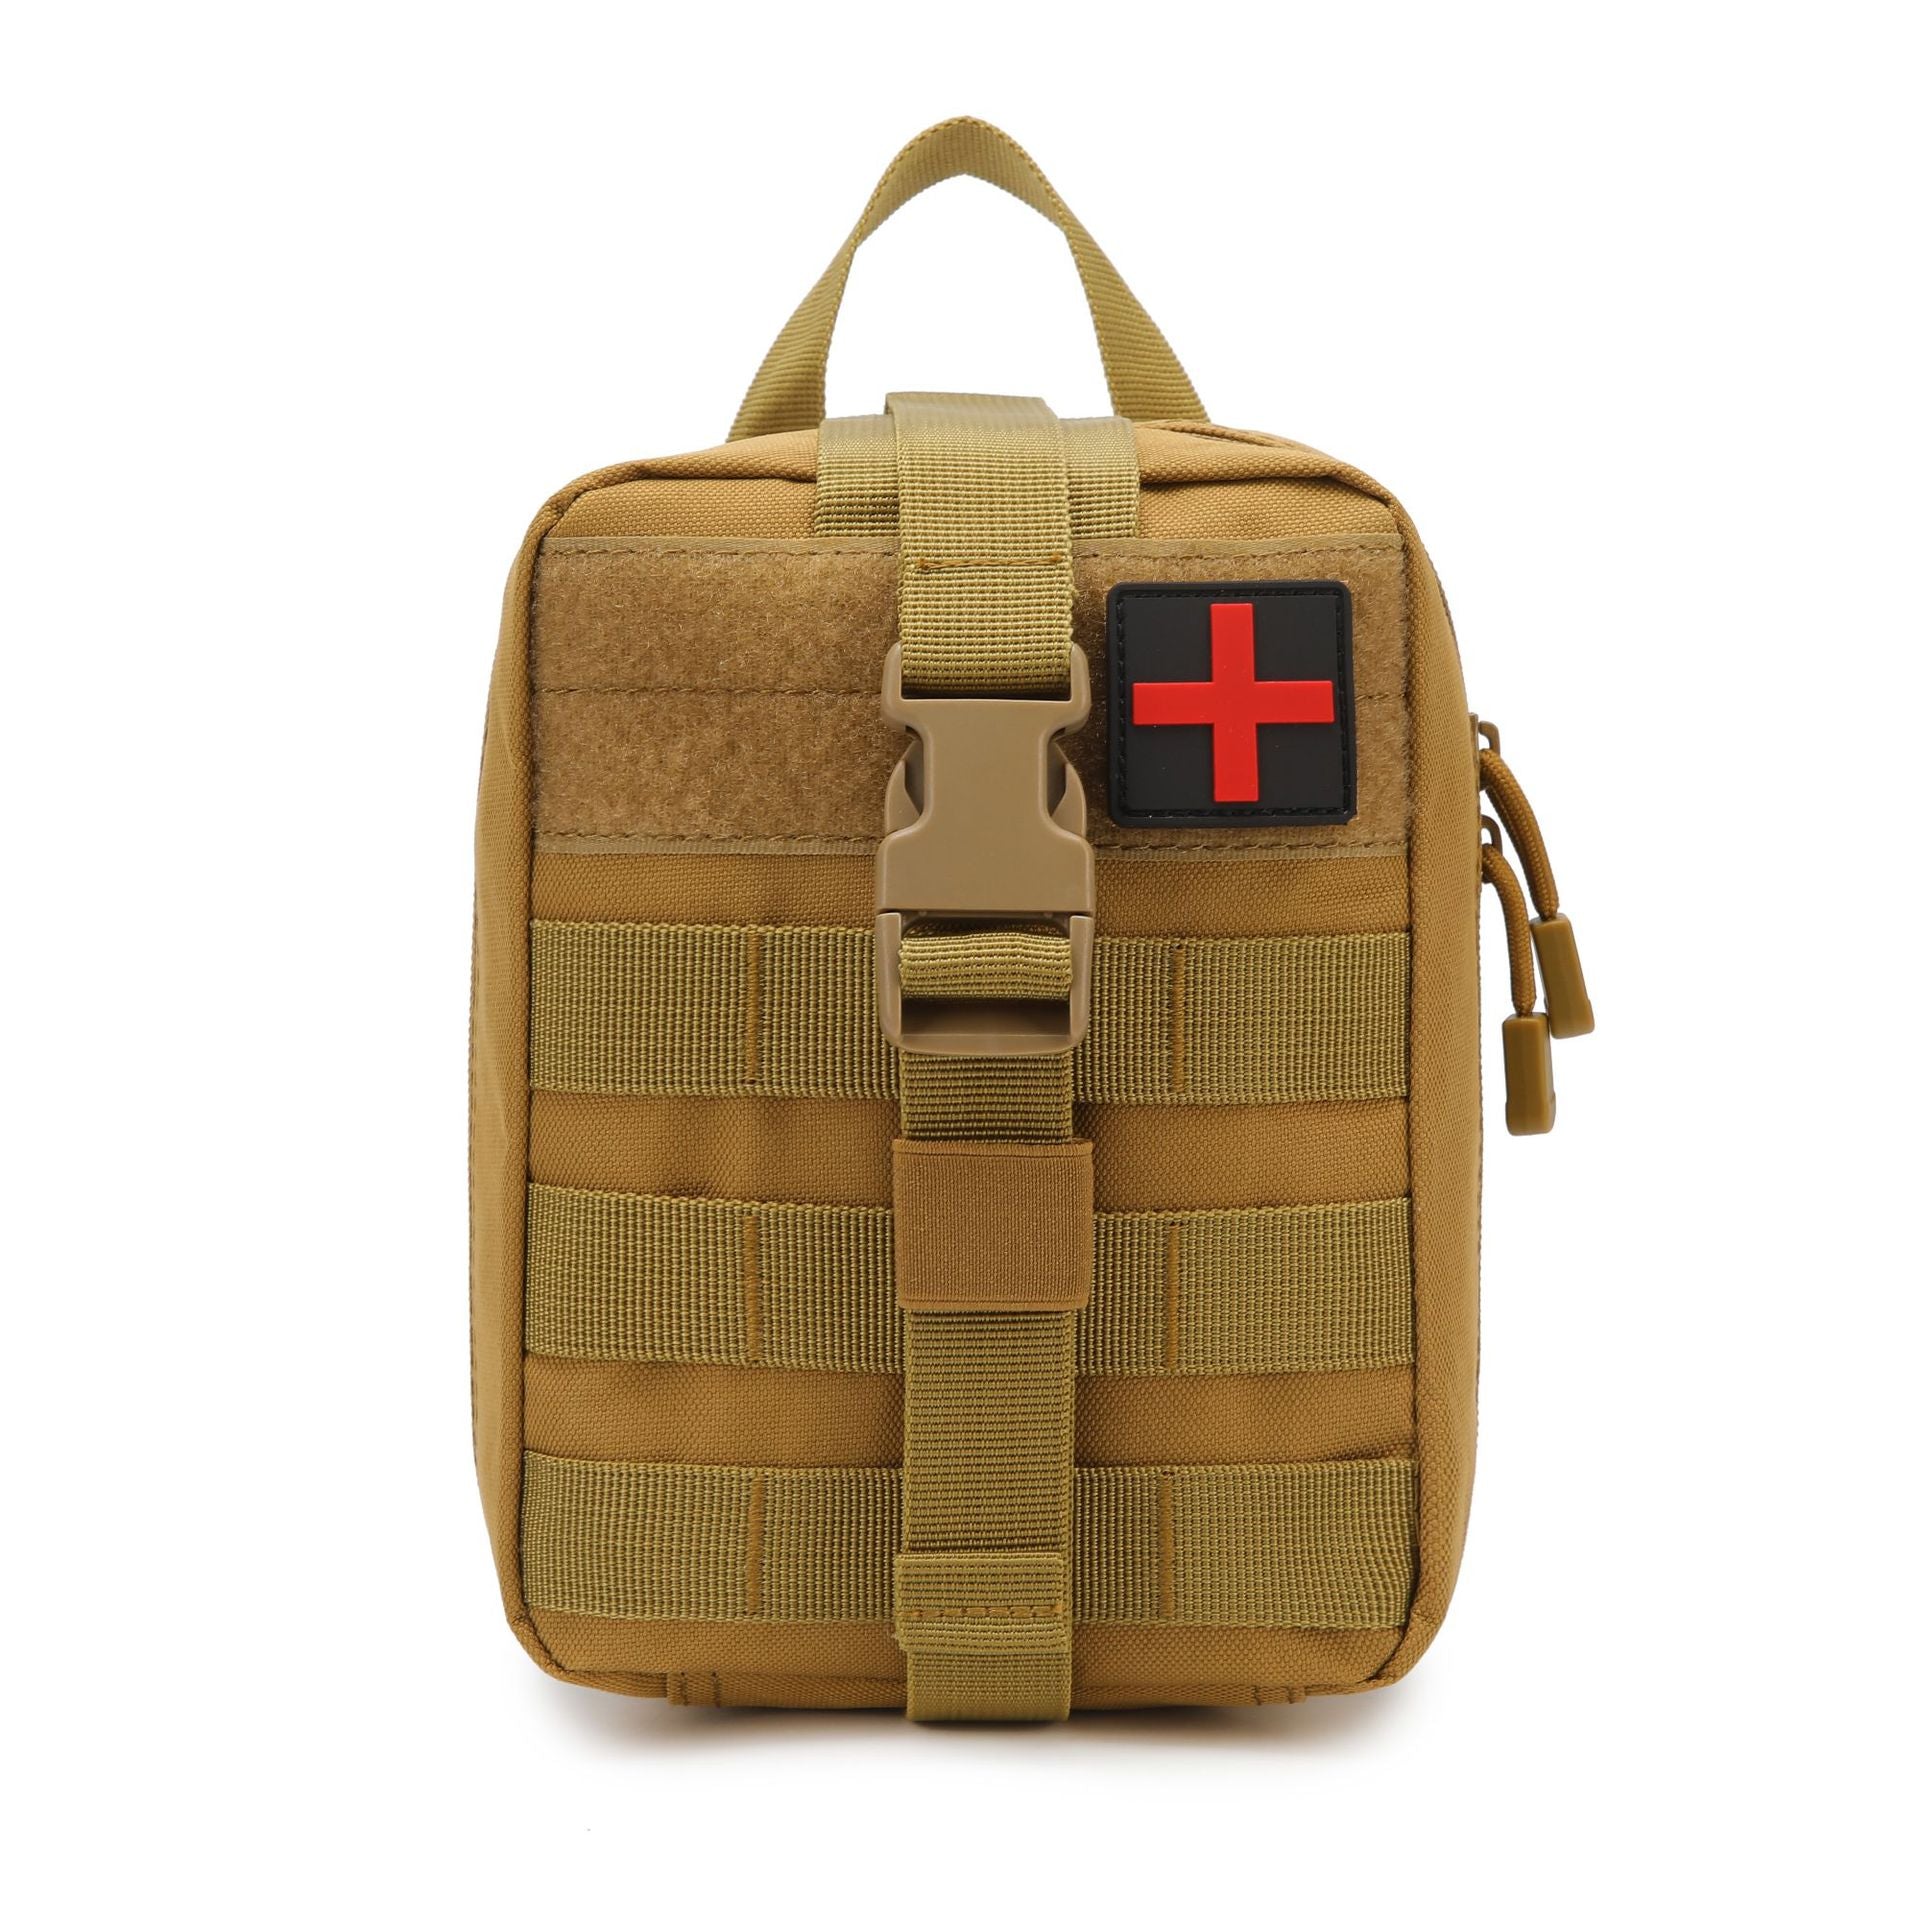 First Aid Kit Emergency Medical Kit - FreeSoldier